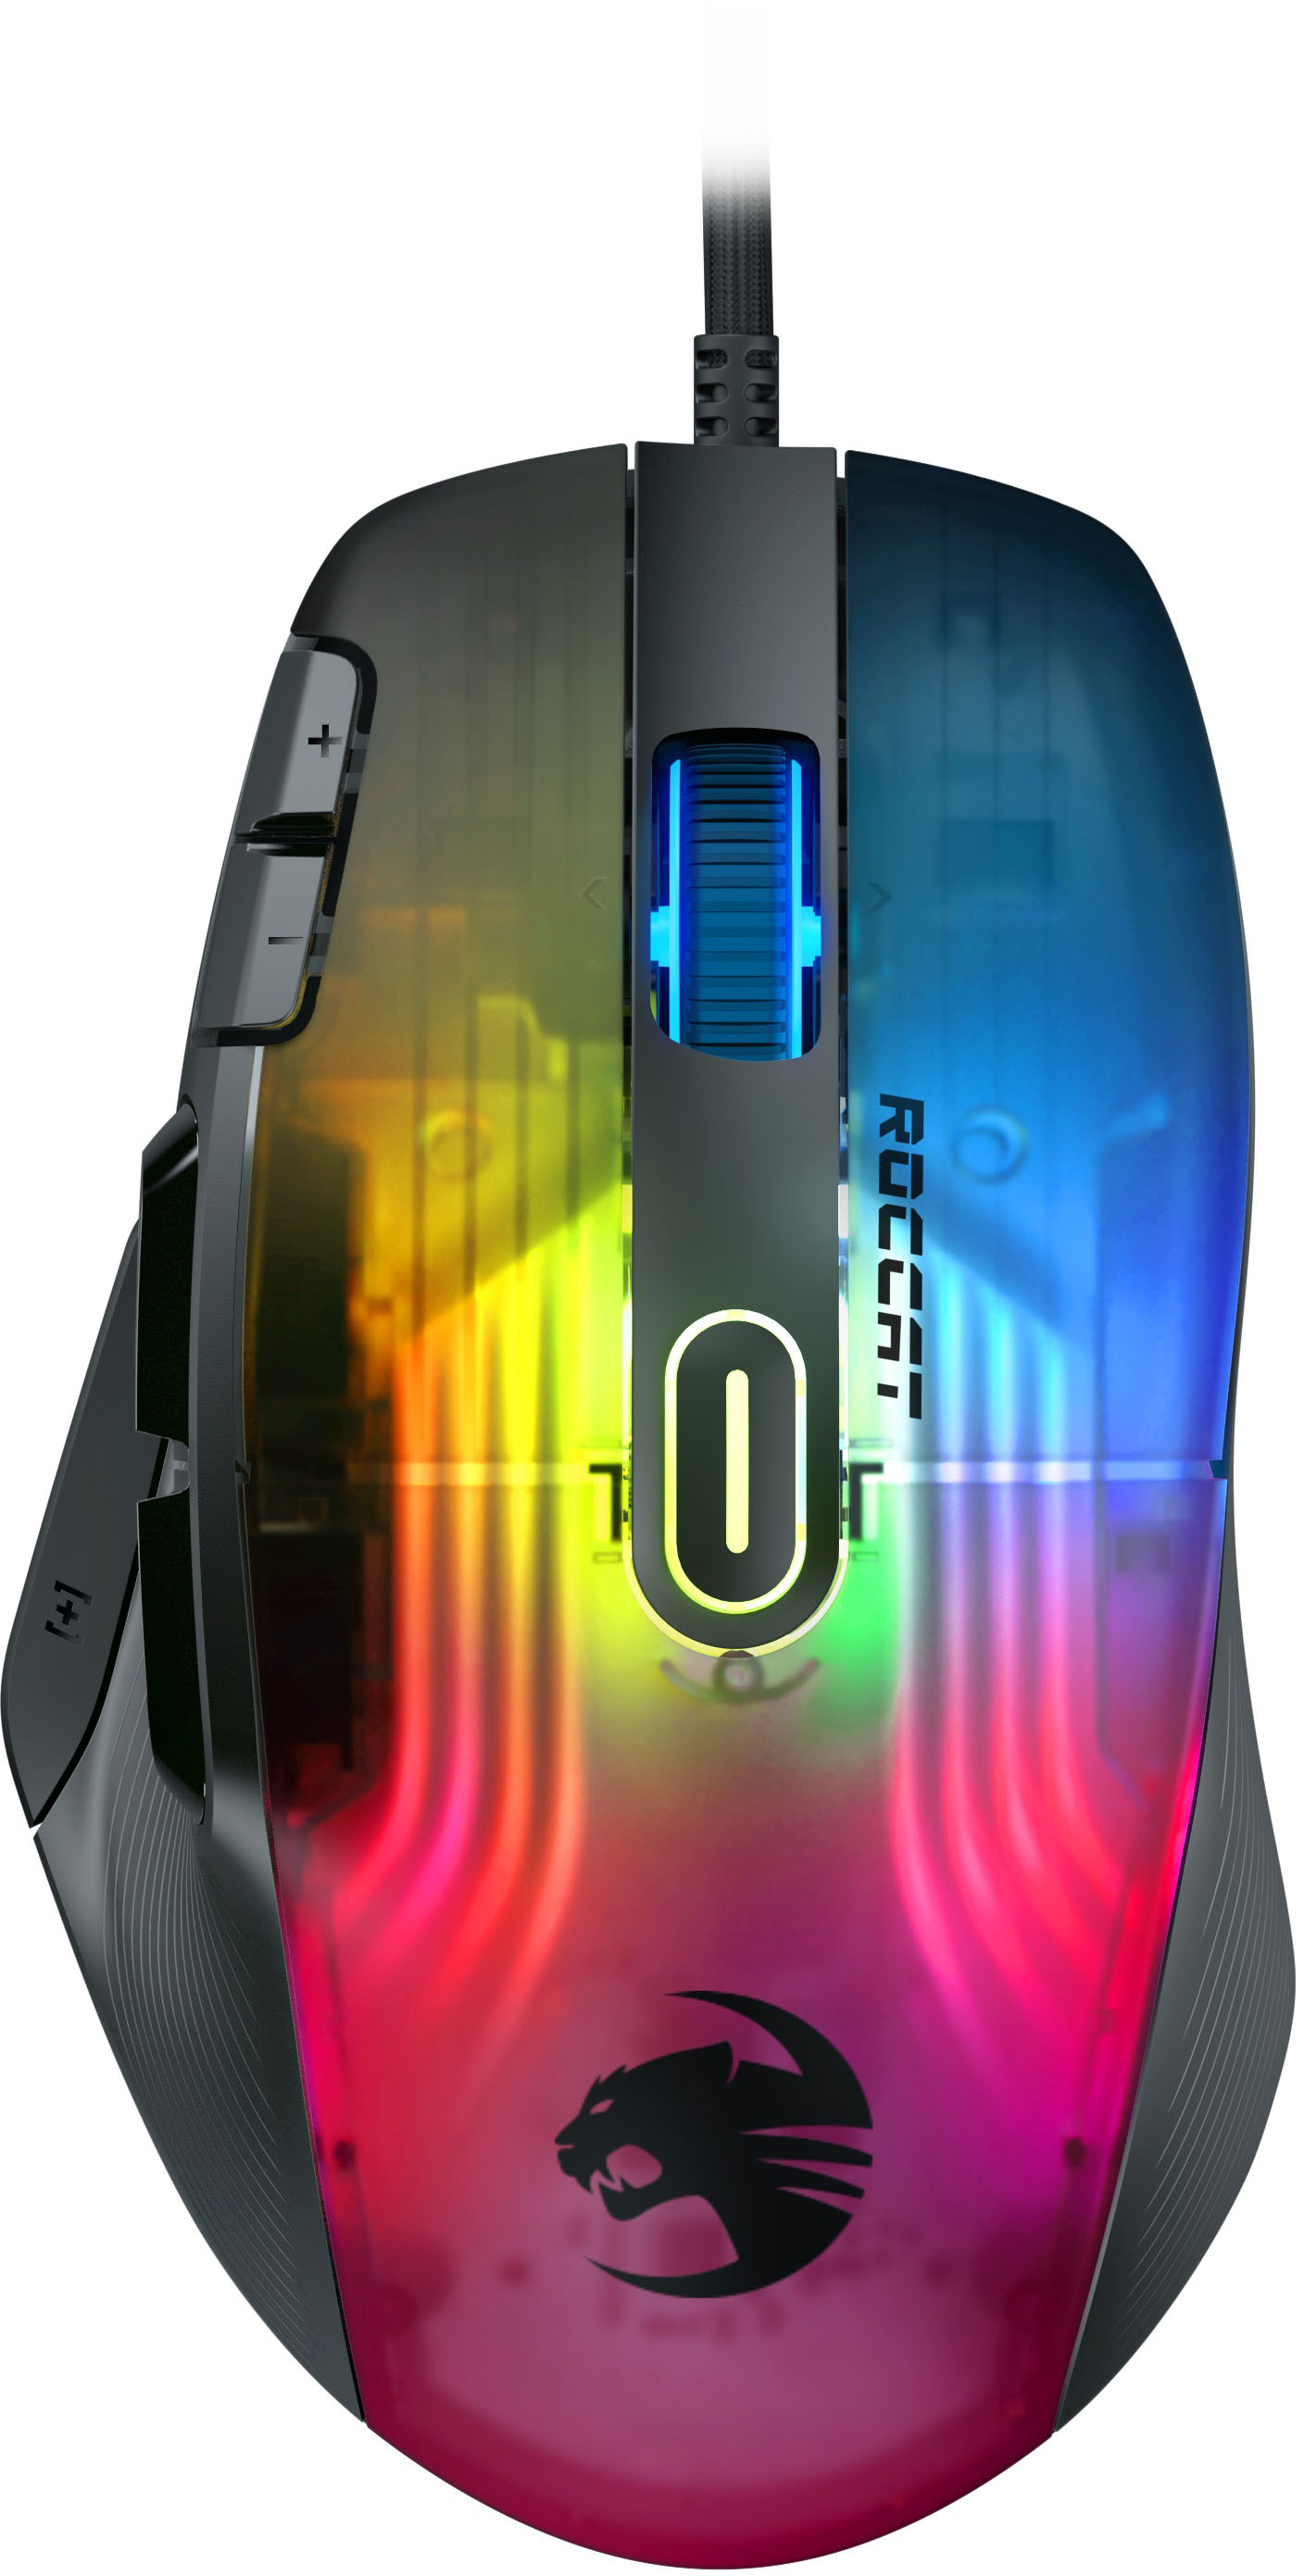 Ambidextrous & with ROC-11-420-01 - Mouse Black ROCCAT Kone AIMO Wired multi-button XP Gaming Best RGB Buy lighting design Optical